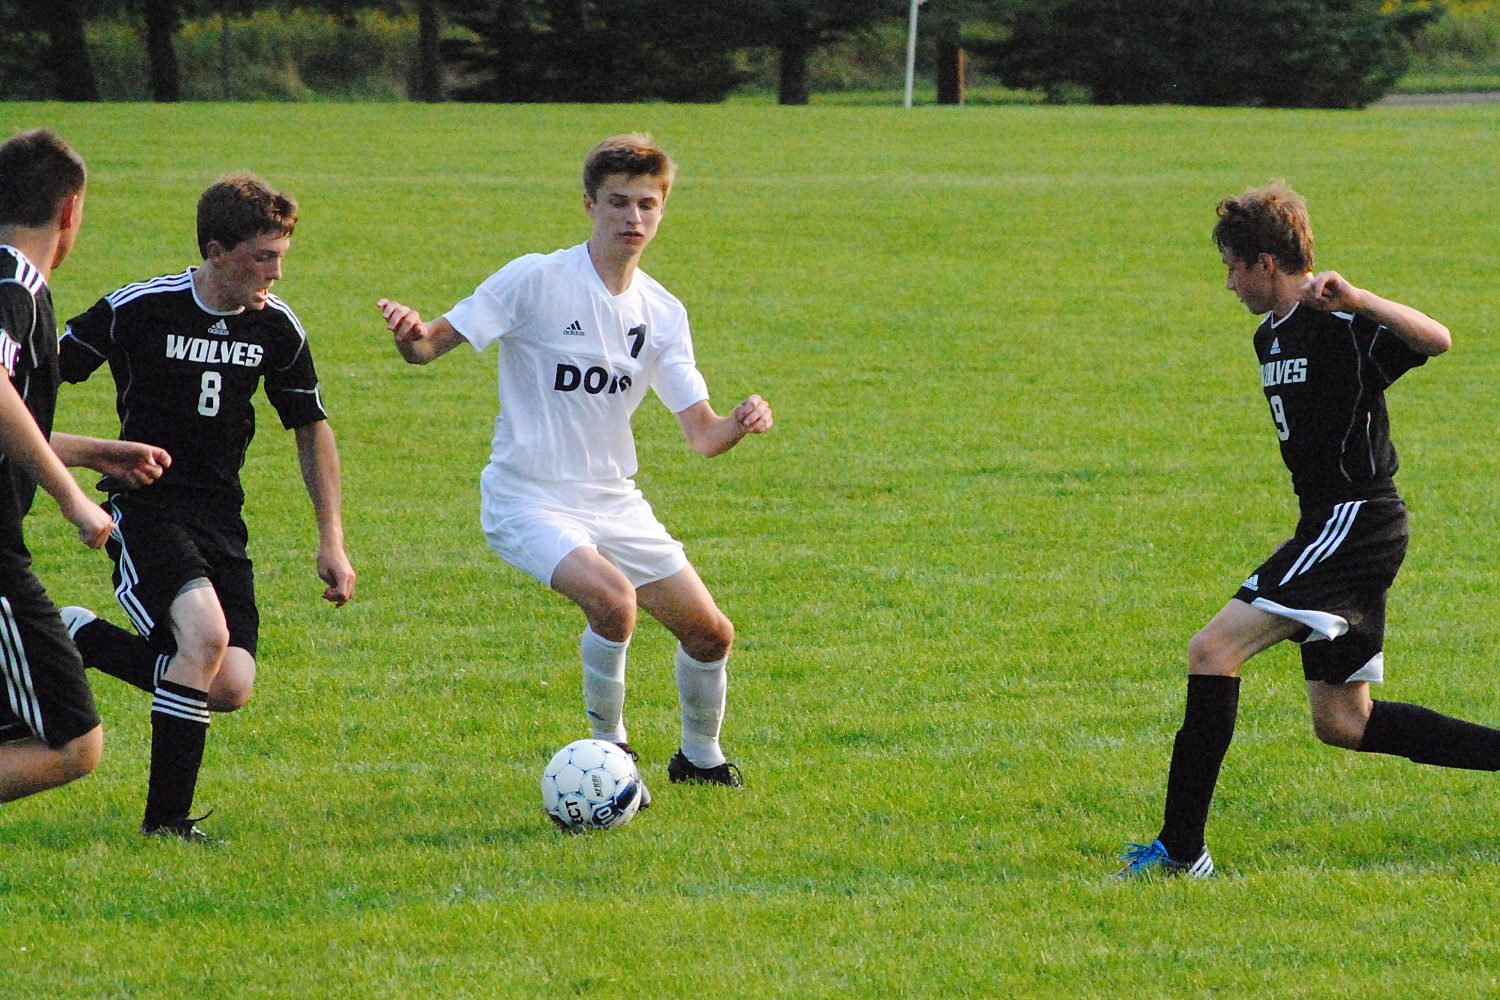 Charles Payant returns to the Columbus Catholic soccer team this fall after having 10 goals and 15 assists last season for the Dons.